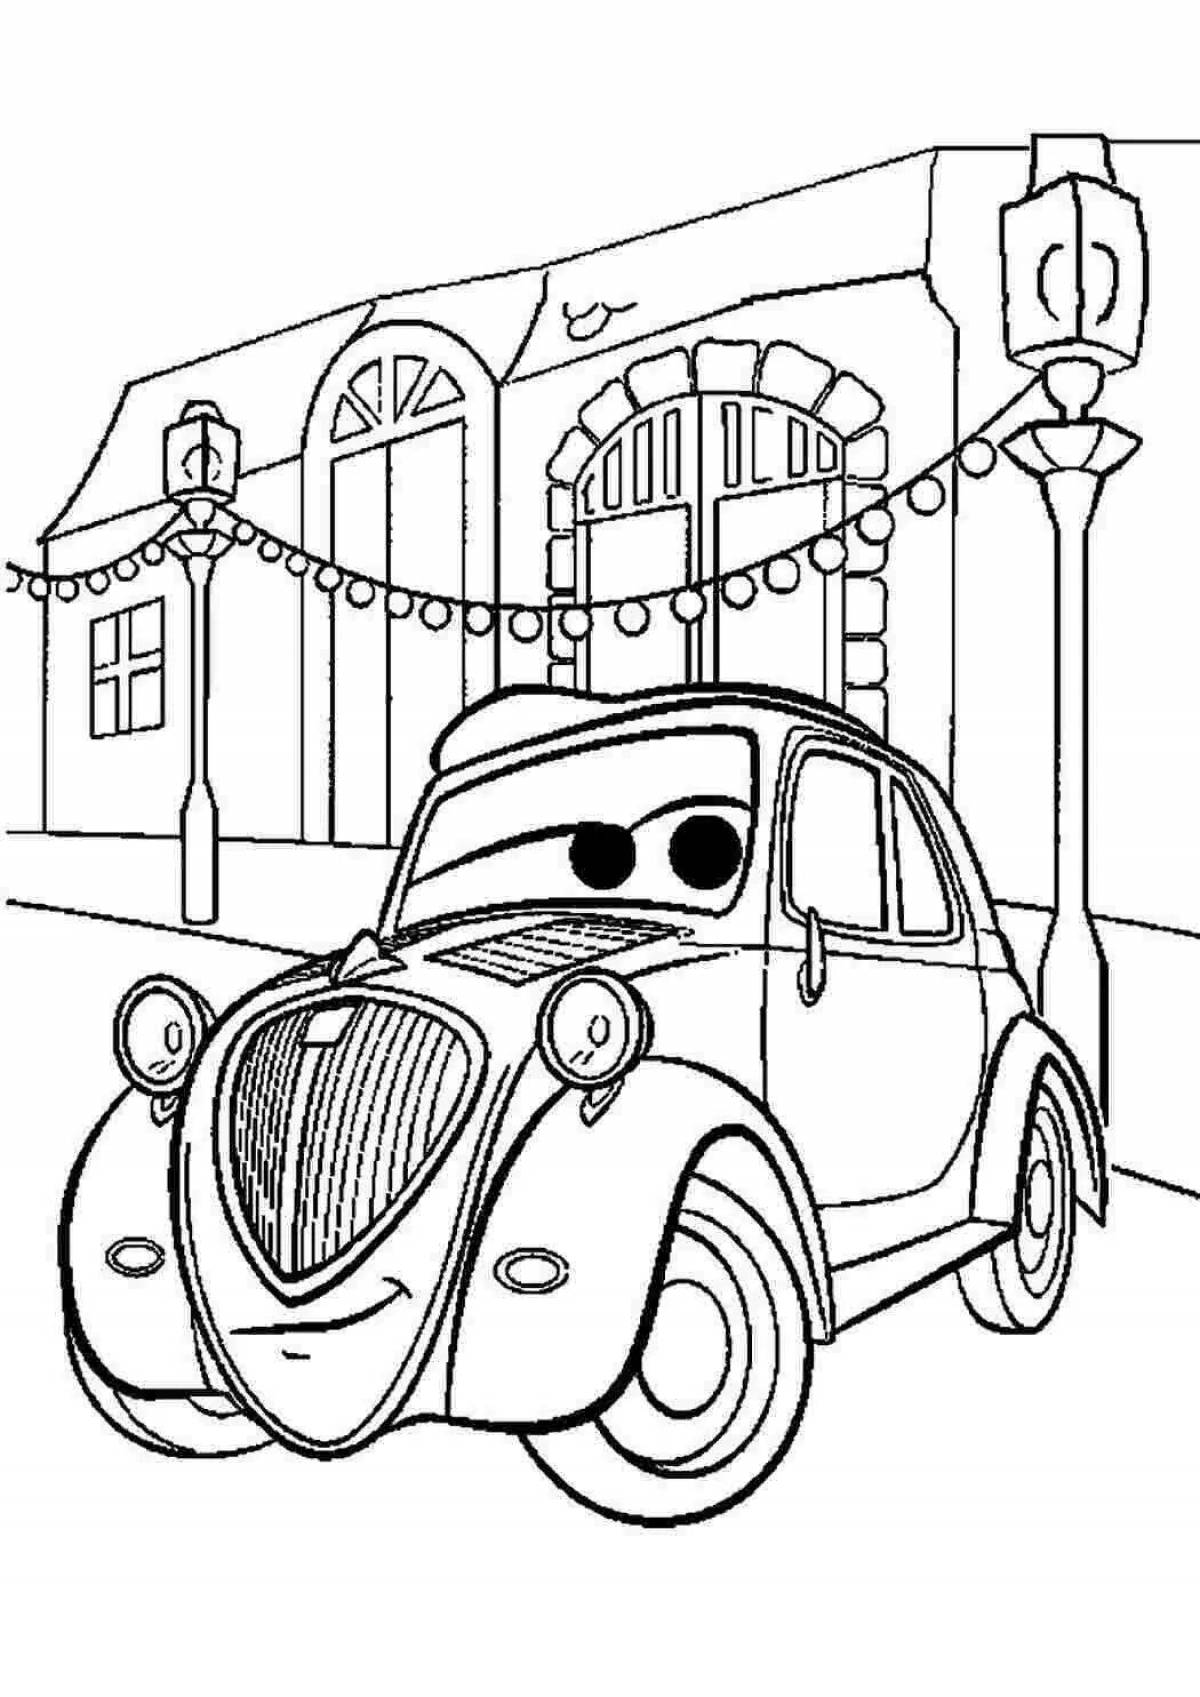 Impressive willy car coloring page